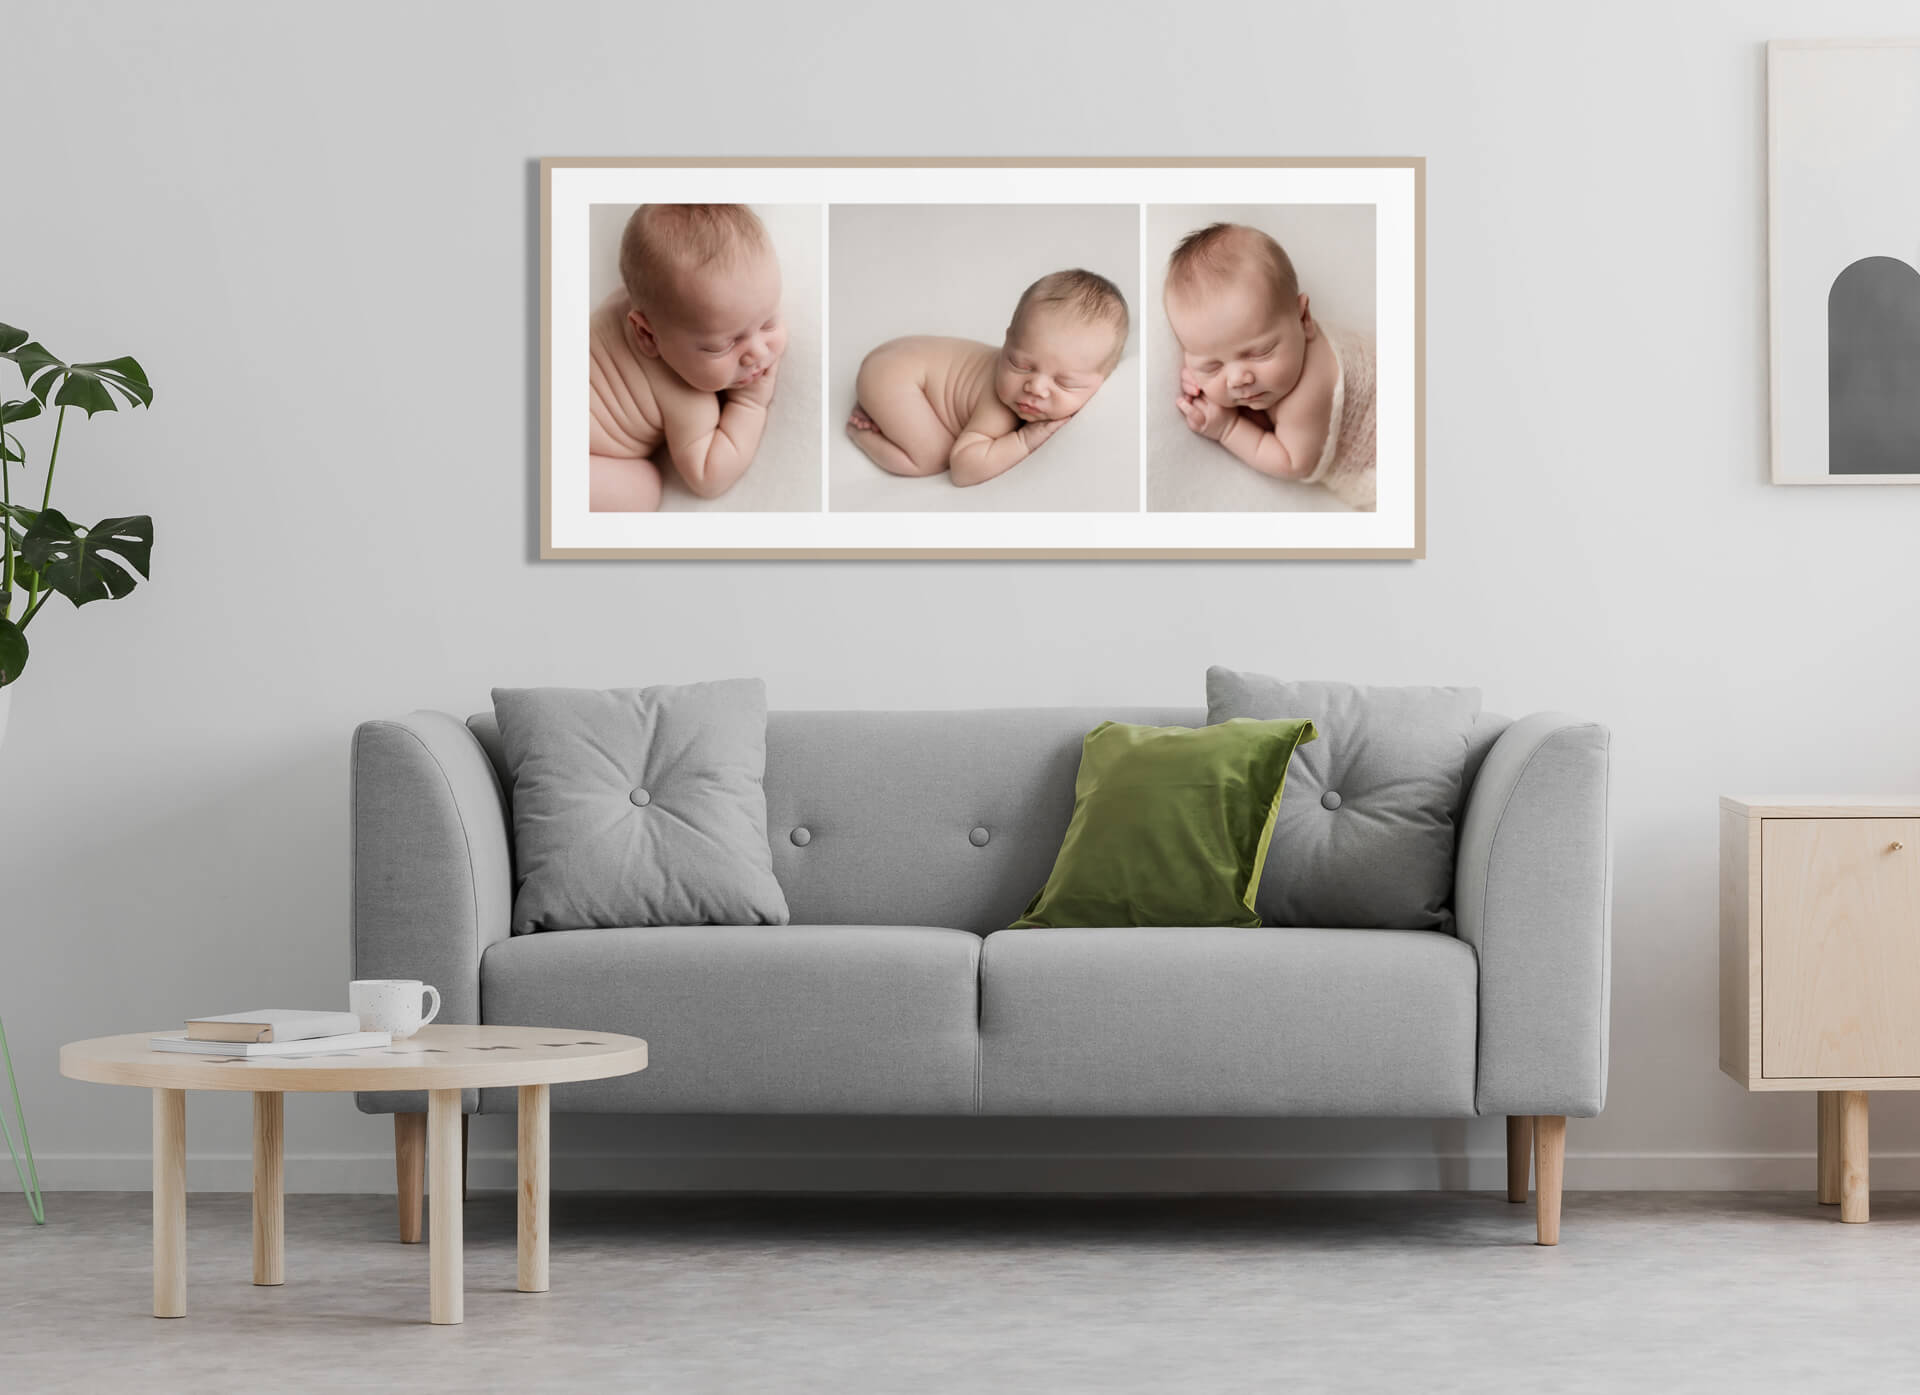 display newborn photography on your wall